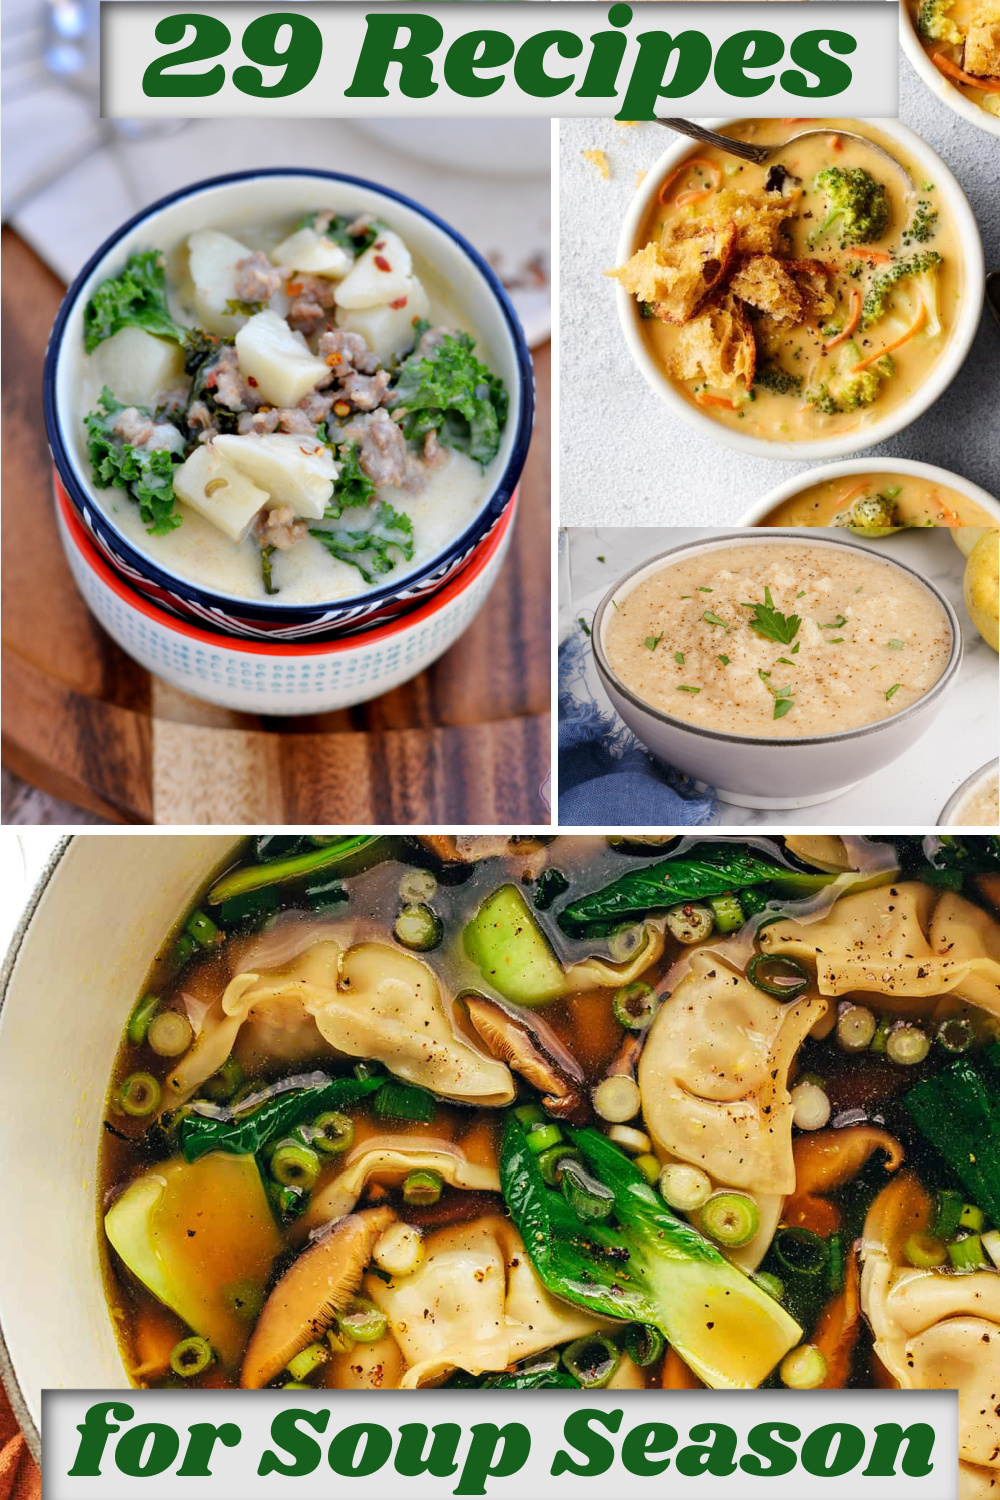 Multiple photos of soup recipes with title